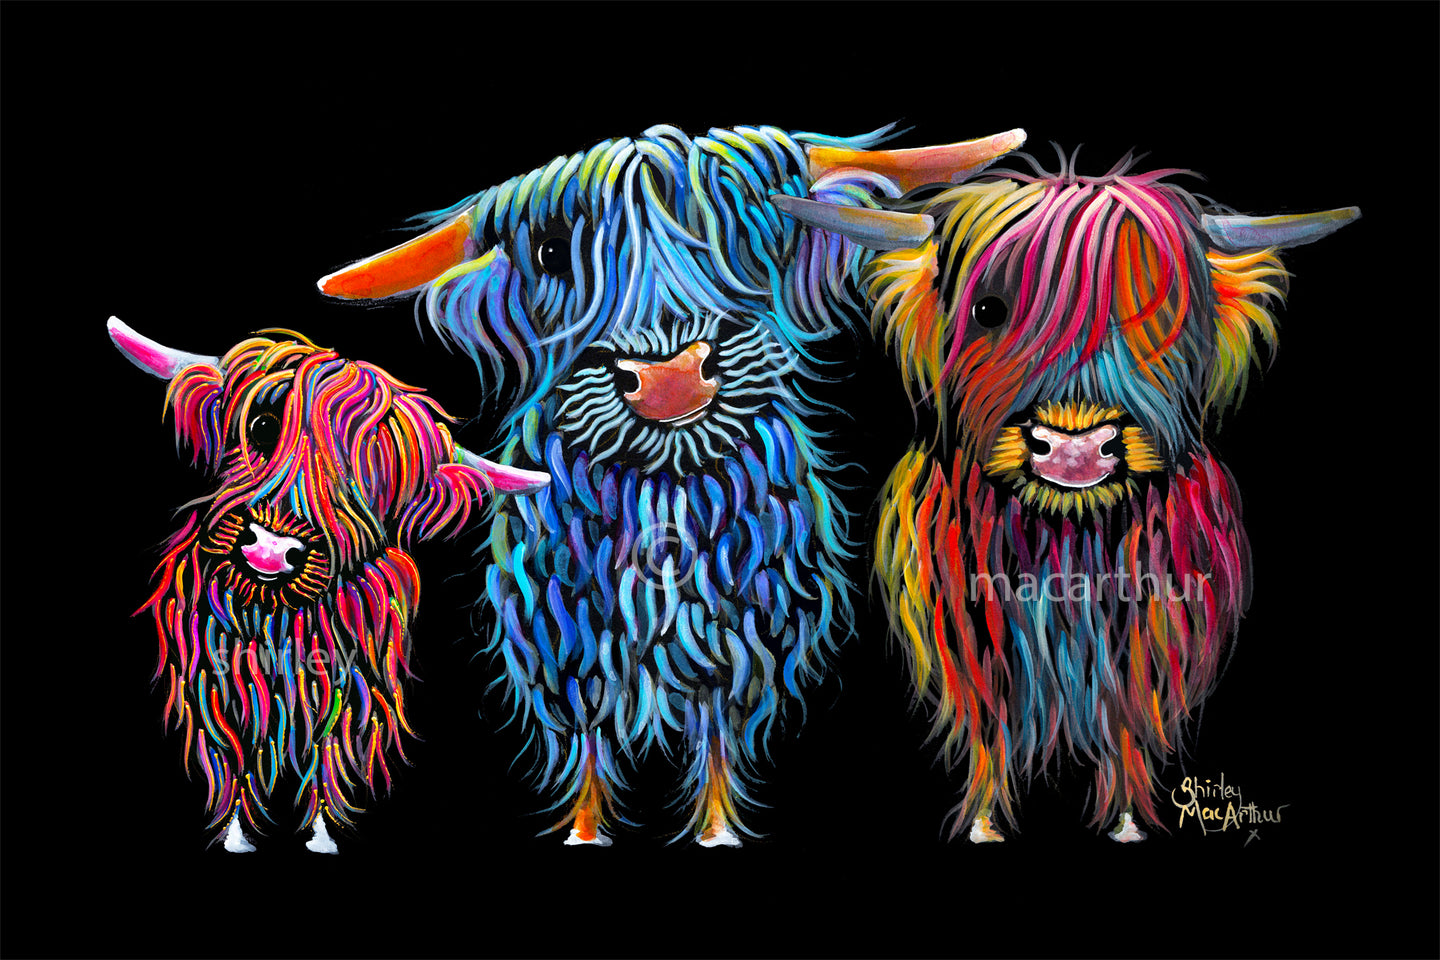 ‘ THe 3 HaiRY CooS ’ Highland Cow Prints  FRoM £8.99